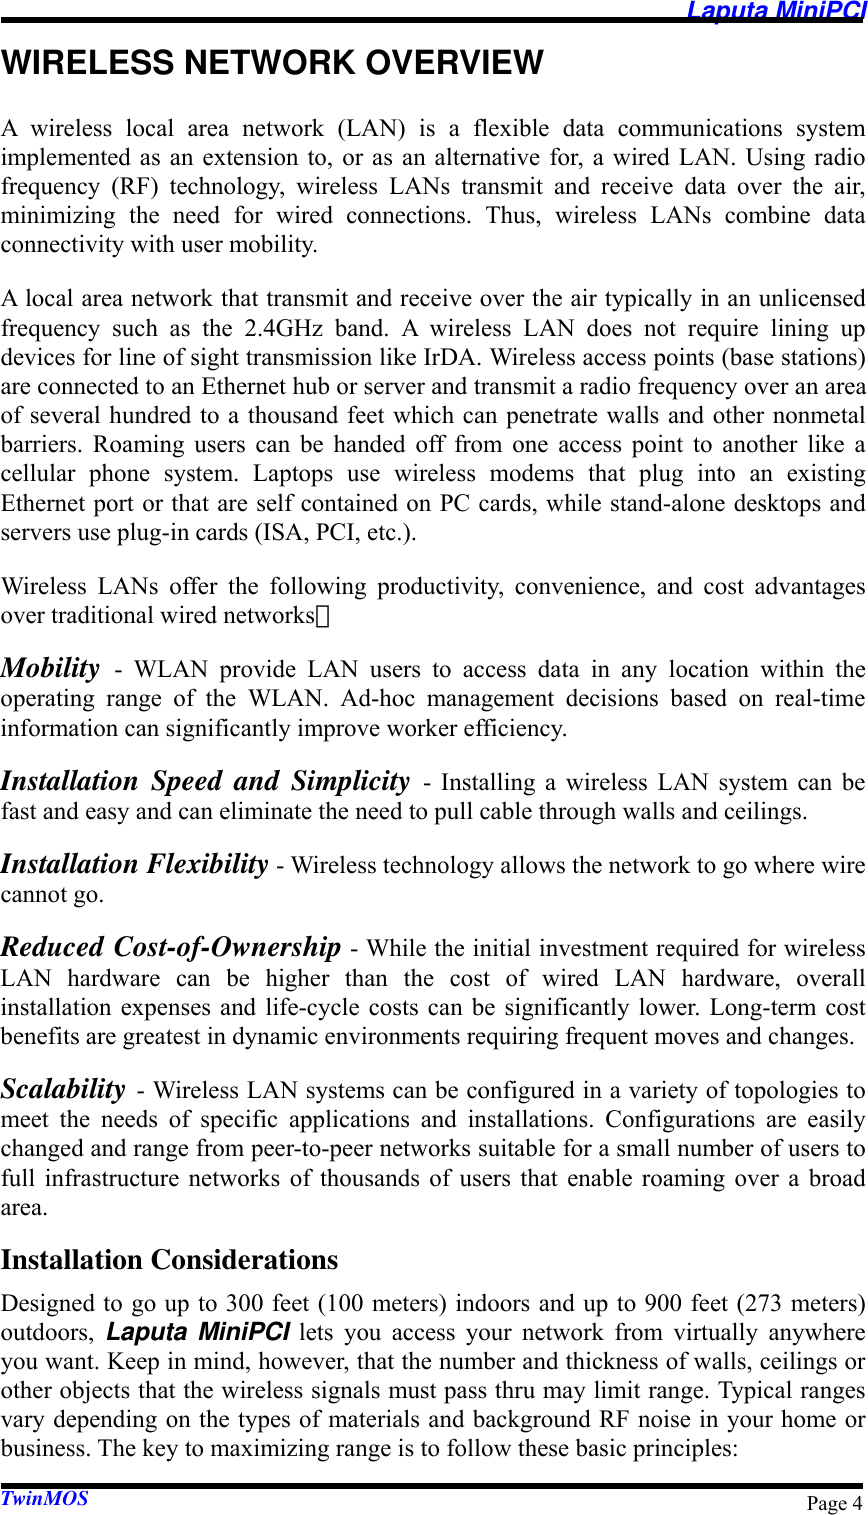   Laputa MiniPCI TwinMOS  Page 4WIRELESS NETWORK OVERVIEW A wireless local area network (LAN) is a flexible data communications system implemented as an extension to, or as an alternative for, a wired LAN. Using radio frequency (RF) technology, wireless LANs transmit and receive data over the air, minimizing the need for wired connections. Thus, wireless LANs combine data connectivity with user mobility. A local area network that transmit and receive over the air typically in an unlicensed frequency such as the 2.4GHz band. A wireless LAN does not require lining up devices for line of sight transmission like IrDA. Wireless access points (base stations) are connected to an Ethernet hub or server and transmit a radio frequency over an area of several hundred to a thousand feet which can penetrate walls and other nonmetal barriers. Roaming users can be handed off from one access point to another like a cellular phone system. Laptops use wireless modems that plug into an existing Ethernet port or that are self contained on PC cards, while stand-alone desktops and servers use plug-in cards (ISA, PCI, etc.). Wireless LANs offer the following productivity, convenience, and cost advantages over traditional wired networks： Mobility  - WLAN provide LAN users to access data in any location within the operating range of the WLAN. Ad-hoc management decisions based on real-time information can significantly improve worker efficiency. Installation Speed and Simplicity - Installing a wireless LAN system can be fast and easy and can eliminate the need to pull cable through walls and ceilings. Installation Flexibility - Wireless technology allows the network to go where wire cannot go. Reduced Cost-of-Ownership - While the initial investment required for wireless LAN hardware can be higher than the cost of wired LAN hardware, overall installation expenses and life-cycle costs can be significantly lower. Long-term cost benefits are greatest in dynamic environments requiring frequent moves and changes. Scalability - Wireless LAN systems can be configured in a variety of topologies to meet the needs of specific applications and installations. Configurations are easily changed and range from peer-to-peer networks suitable for a small number of users to full infrastructure networks of thousands of users that enable roaming over a broad area. Installation Considerations Designed to go up to 300 feet (100 meters) indoors and up to 900 feet (273 meters) outdoors,  Laputa MiniPCI lets you access your network from virtually anywhere you want. Keep in mind, however, that the number and thickness of walls, ceilings or other objects that the wireless signals must pass thru may limit range. Typical ranges vary depending on the types of materials and background RF noise in your home or business. The key to maximizing range is to follow these basic principles: